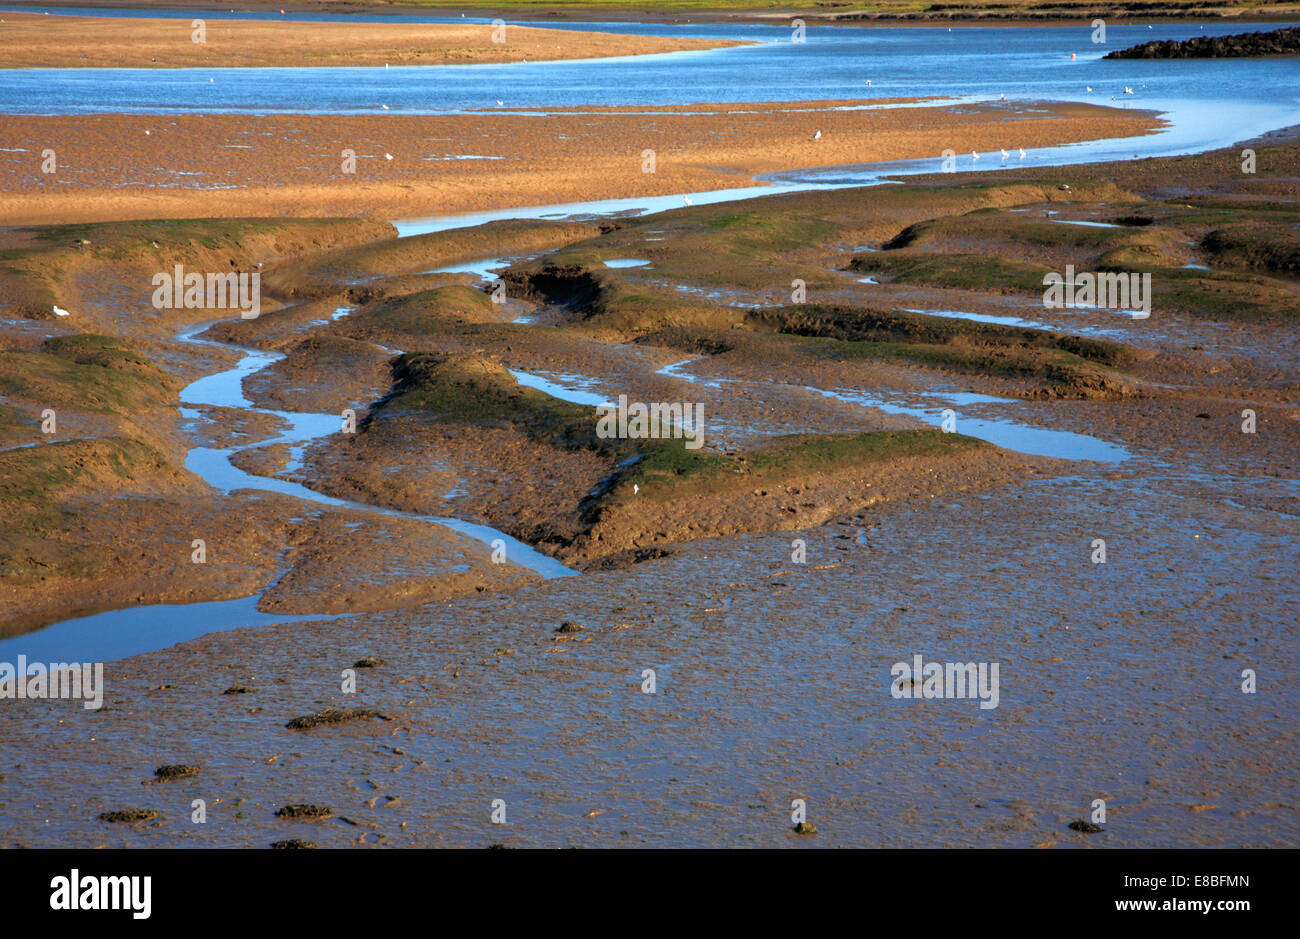 A view of scoured mud flats and sand banks at low water in Burnham Overy creek, Norfolk, England, United Kingdom. Stock Photo